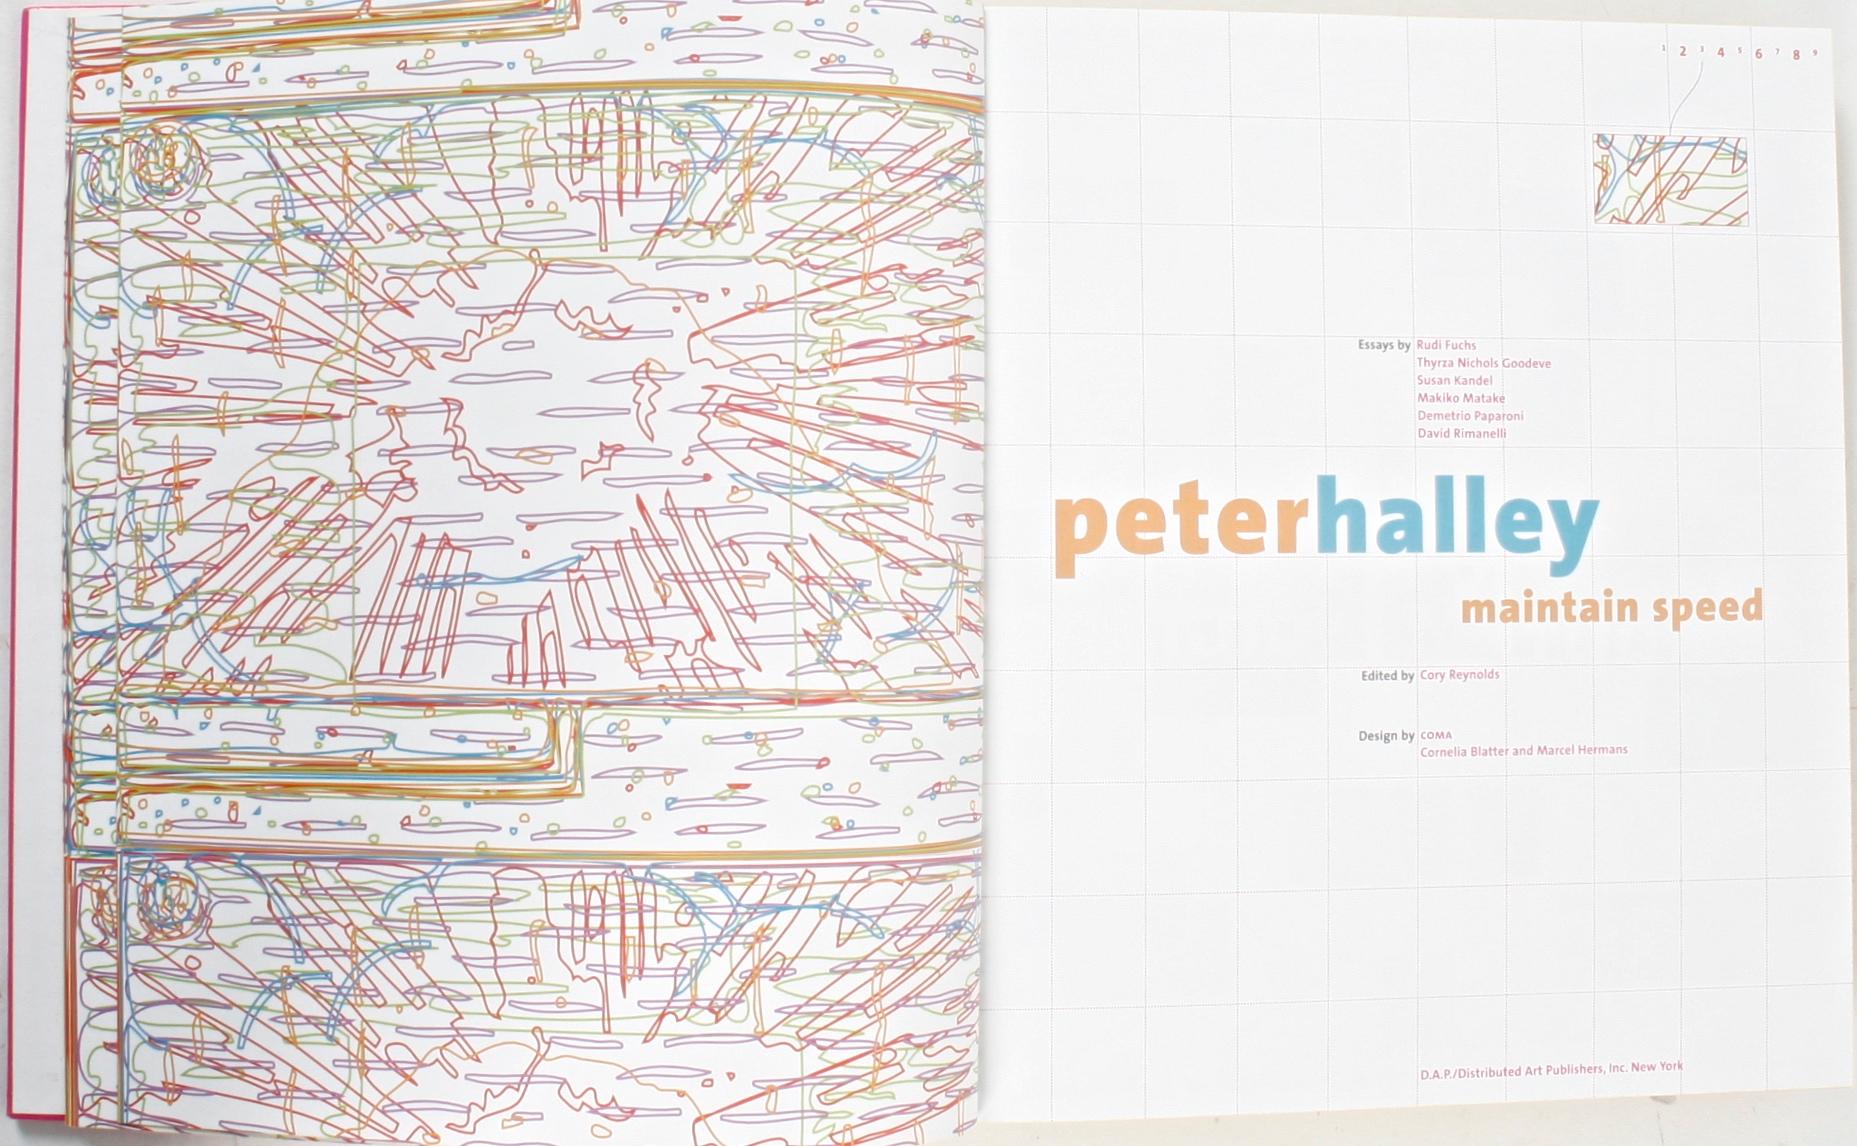 Peter Halley Maintain Speed. New York: Distributed Art Publishers, Inc., 2000. New First Edition hardcover. 217 pp. A survey of the full range of Peter Halley's work and career including essays by an international group of noted art critics. Peter